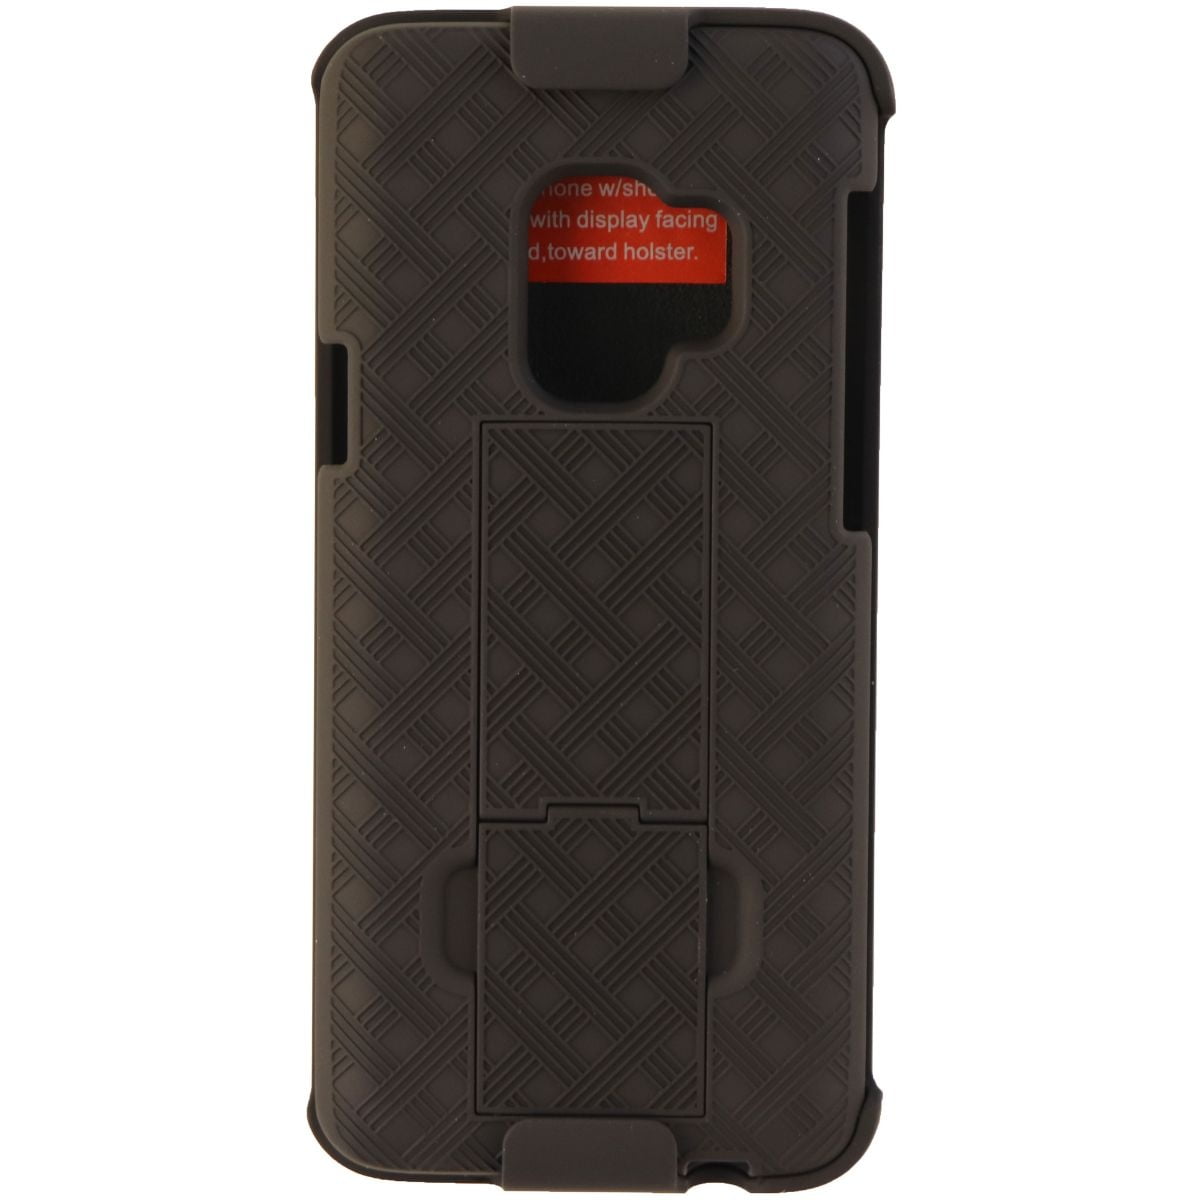 Verizon Shell Case and Holster Combo for Samsung Galaxy S9 Smartphones - Black